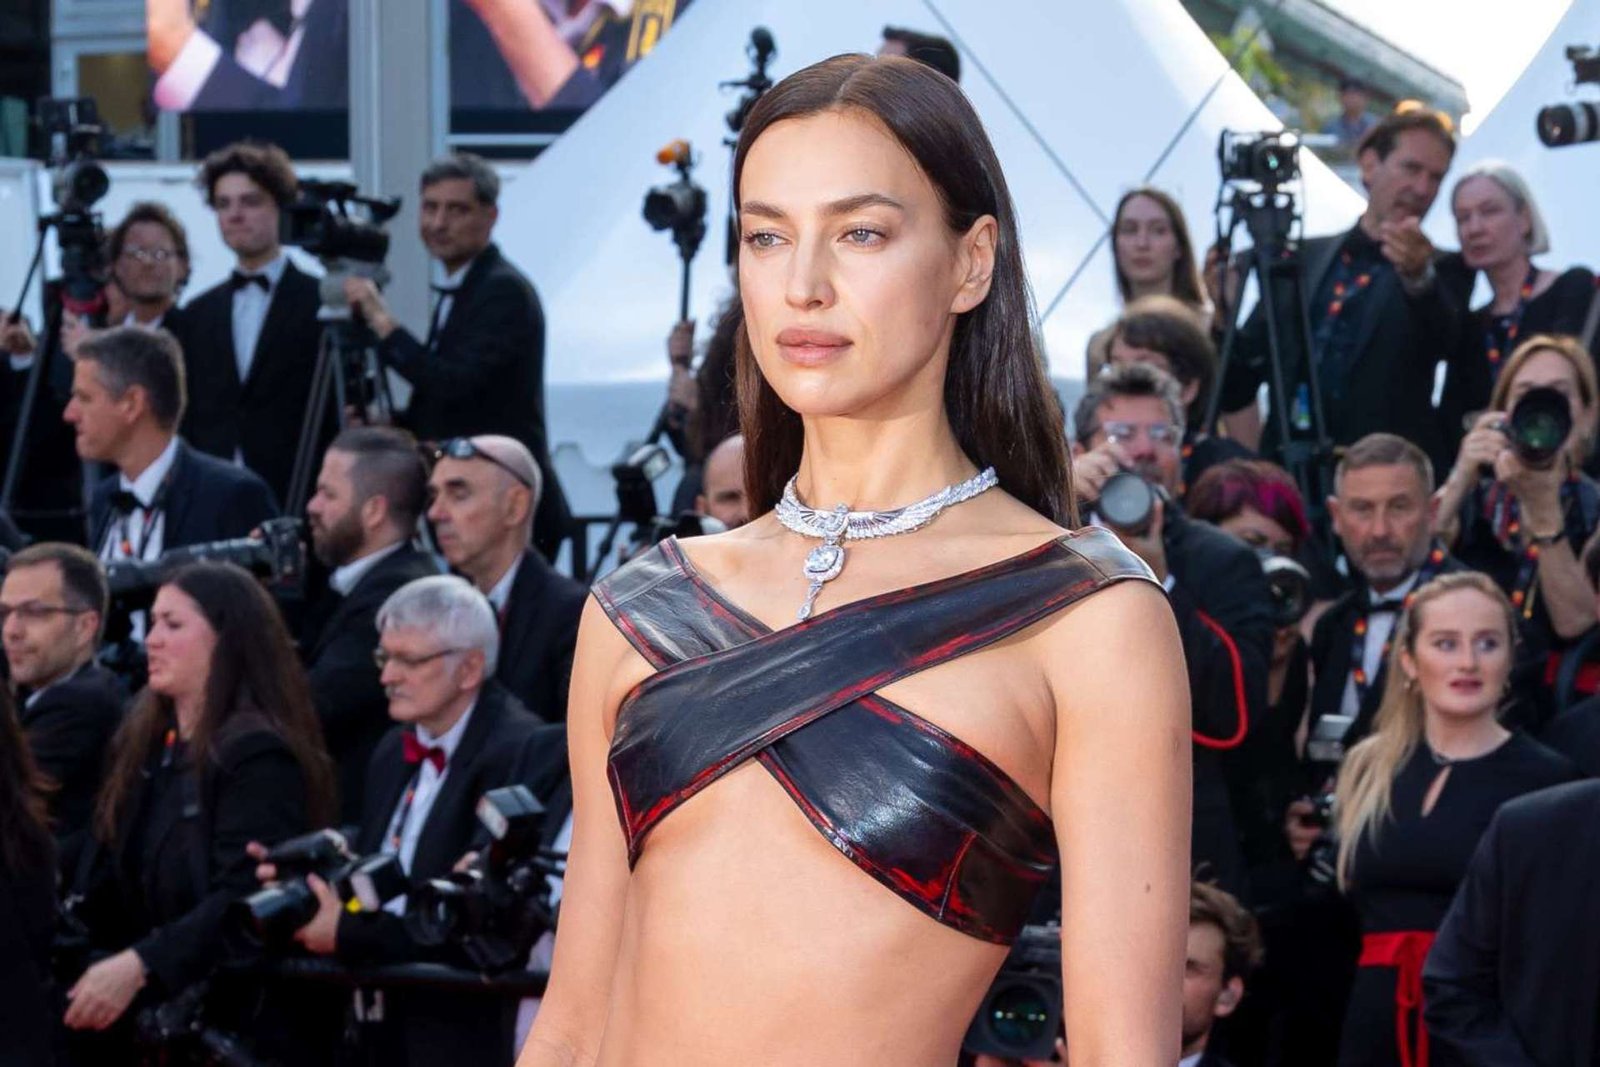 Famous supermodel Irina Shayk shared her 38th birthday celebration with fans, captivating fans with a series of dazzling events over the weekend